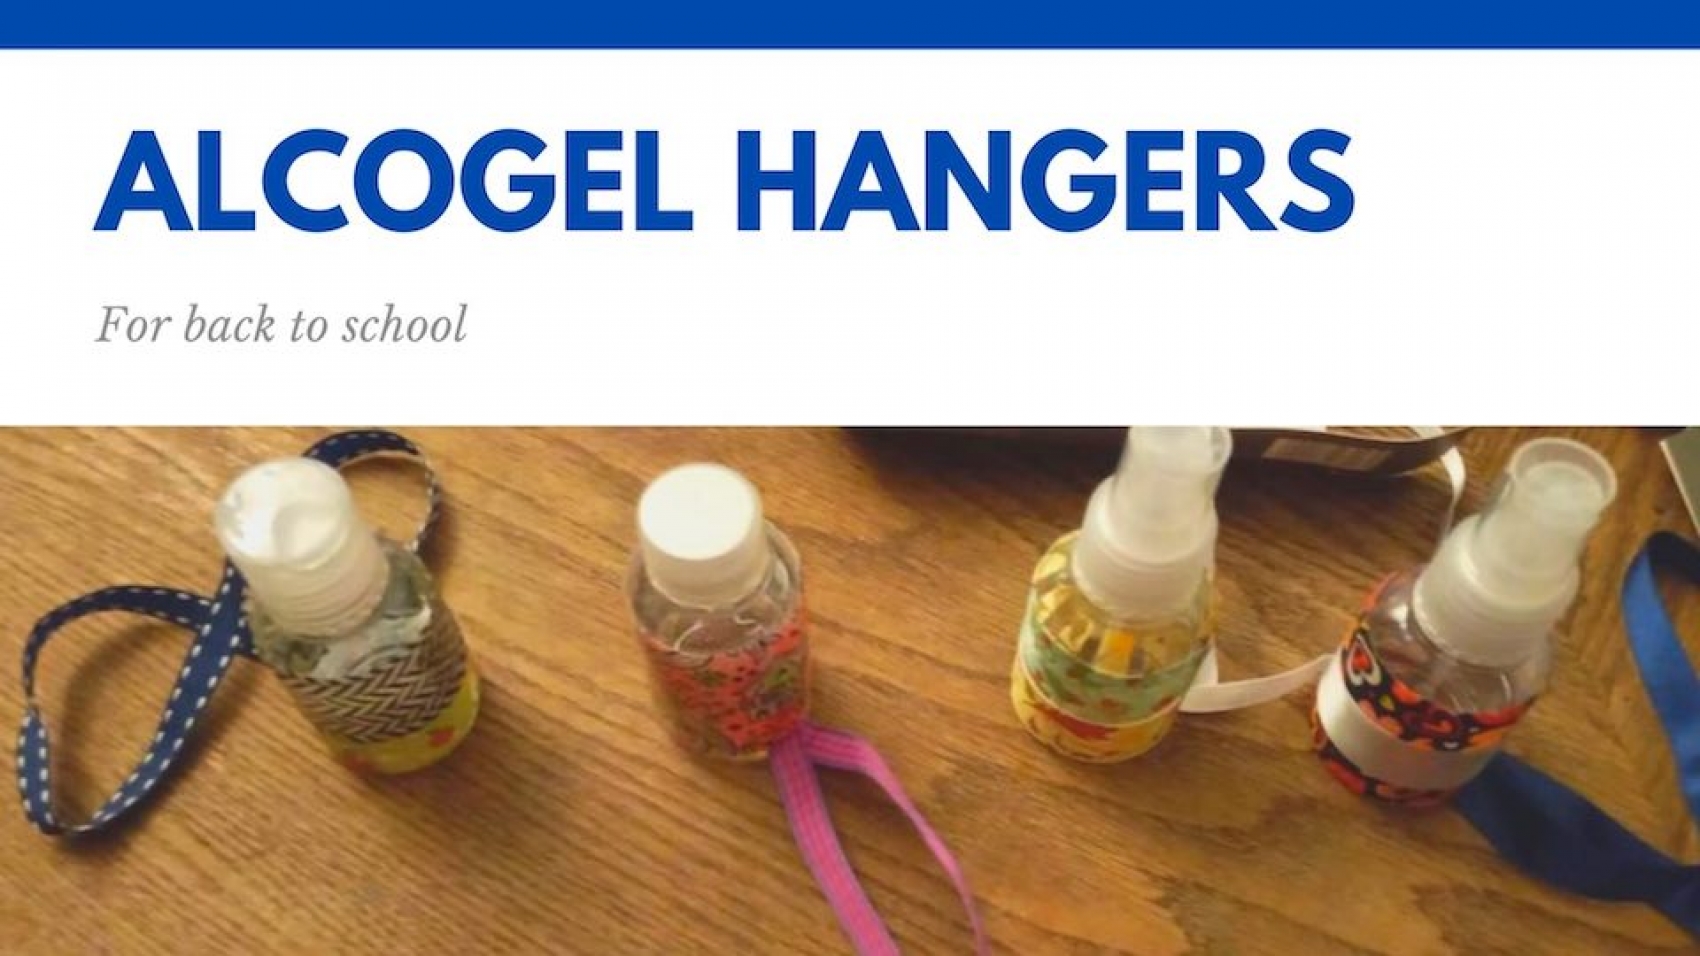 Alcogel Hangers Back to School with picture of id made bottles